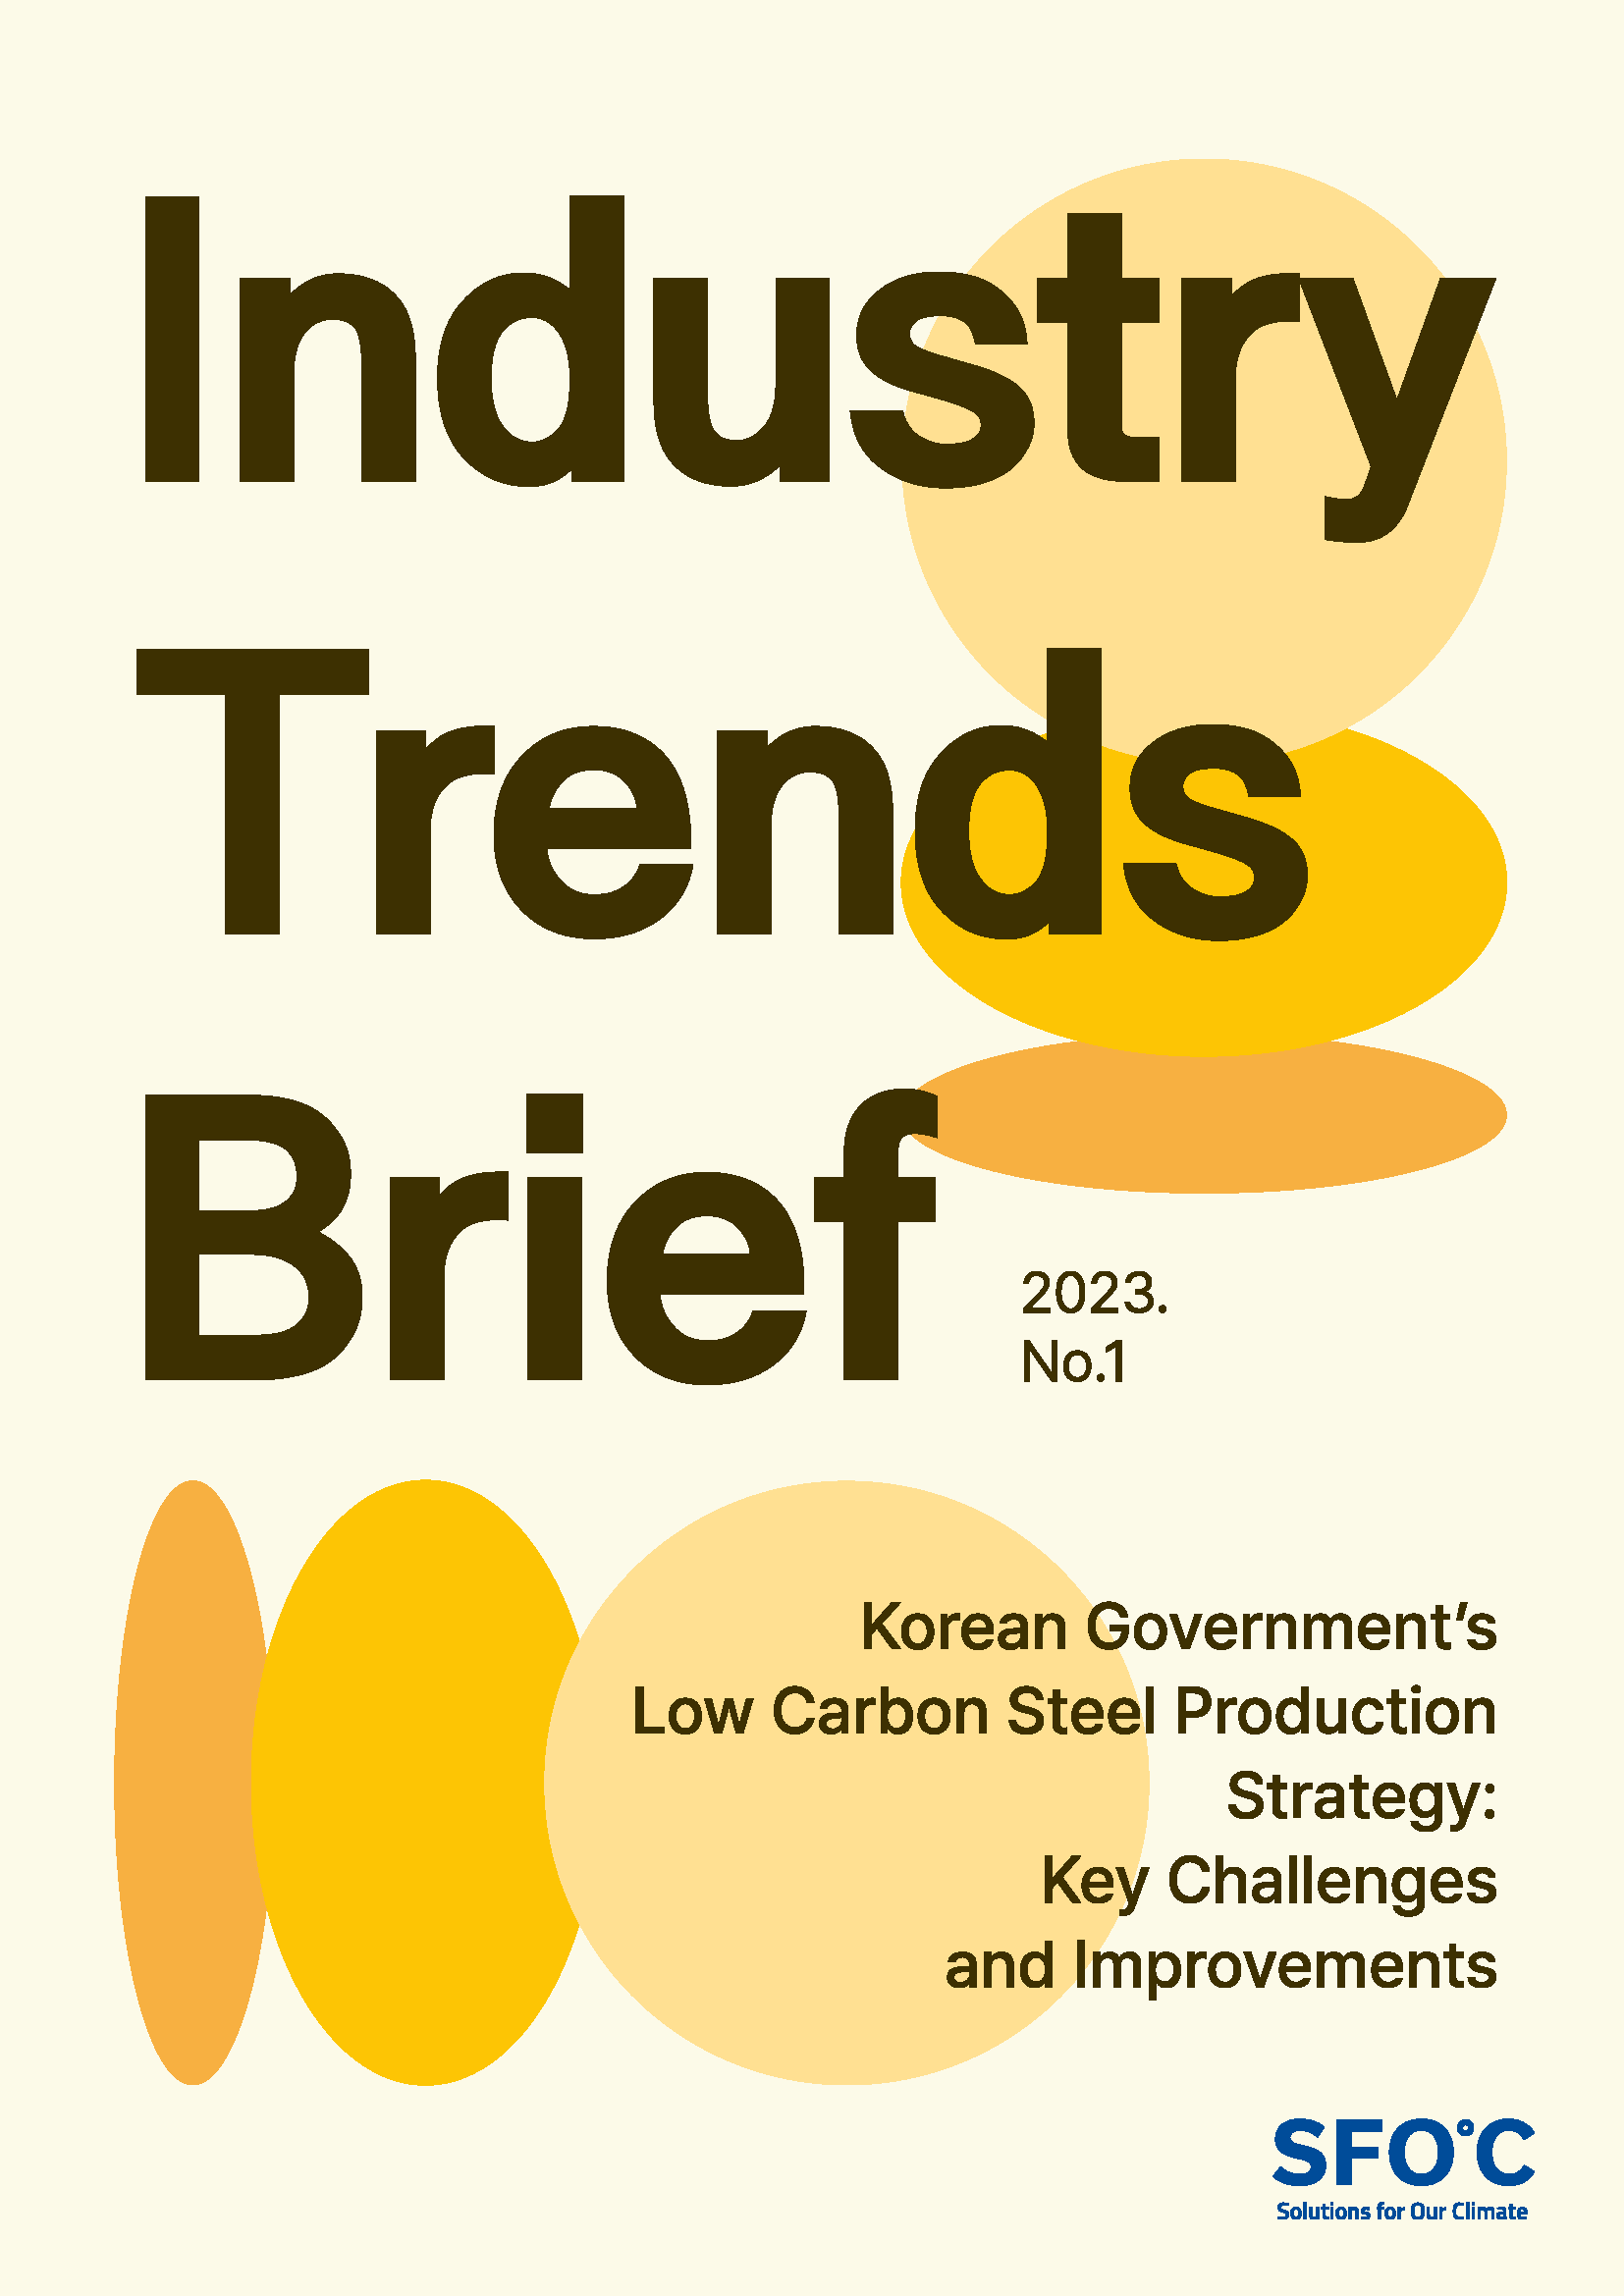 Industry Trends Reports No.1: Korean Government's Low Carbon Steel Production Strategy